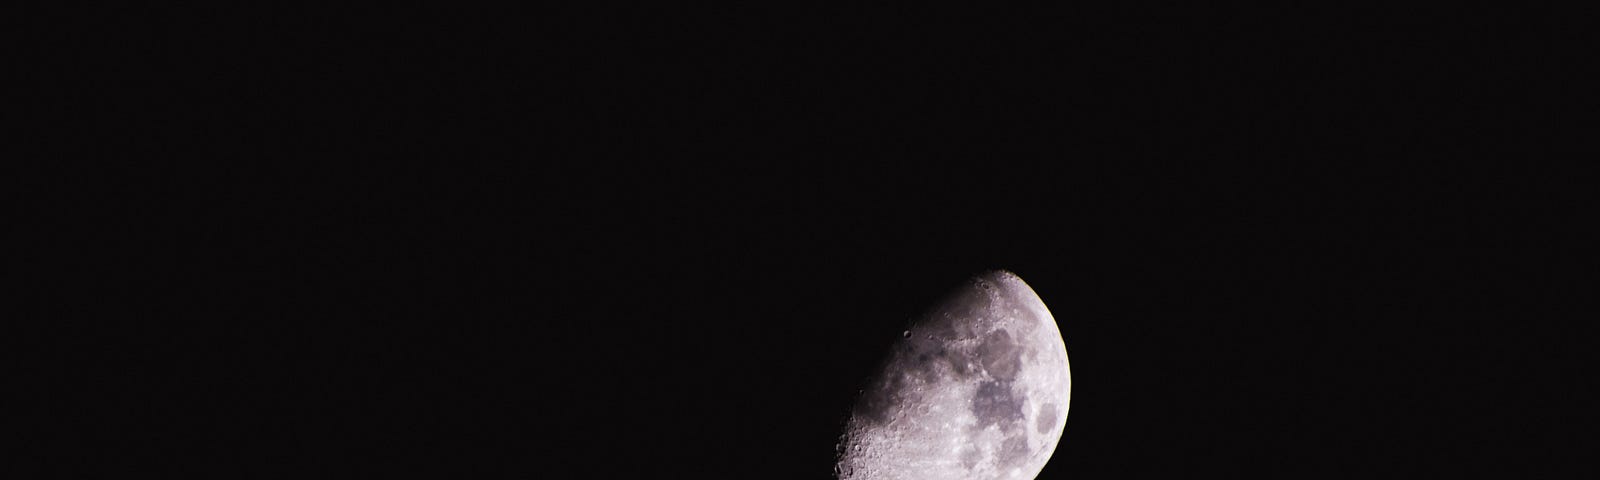 picture of a waning gibbous moon using a telescope.